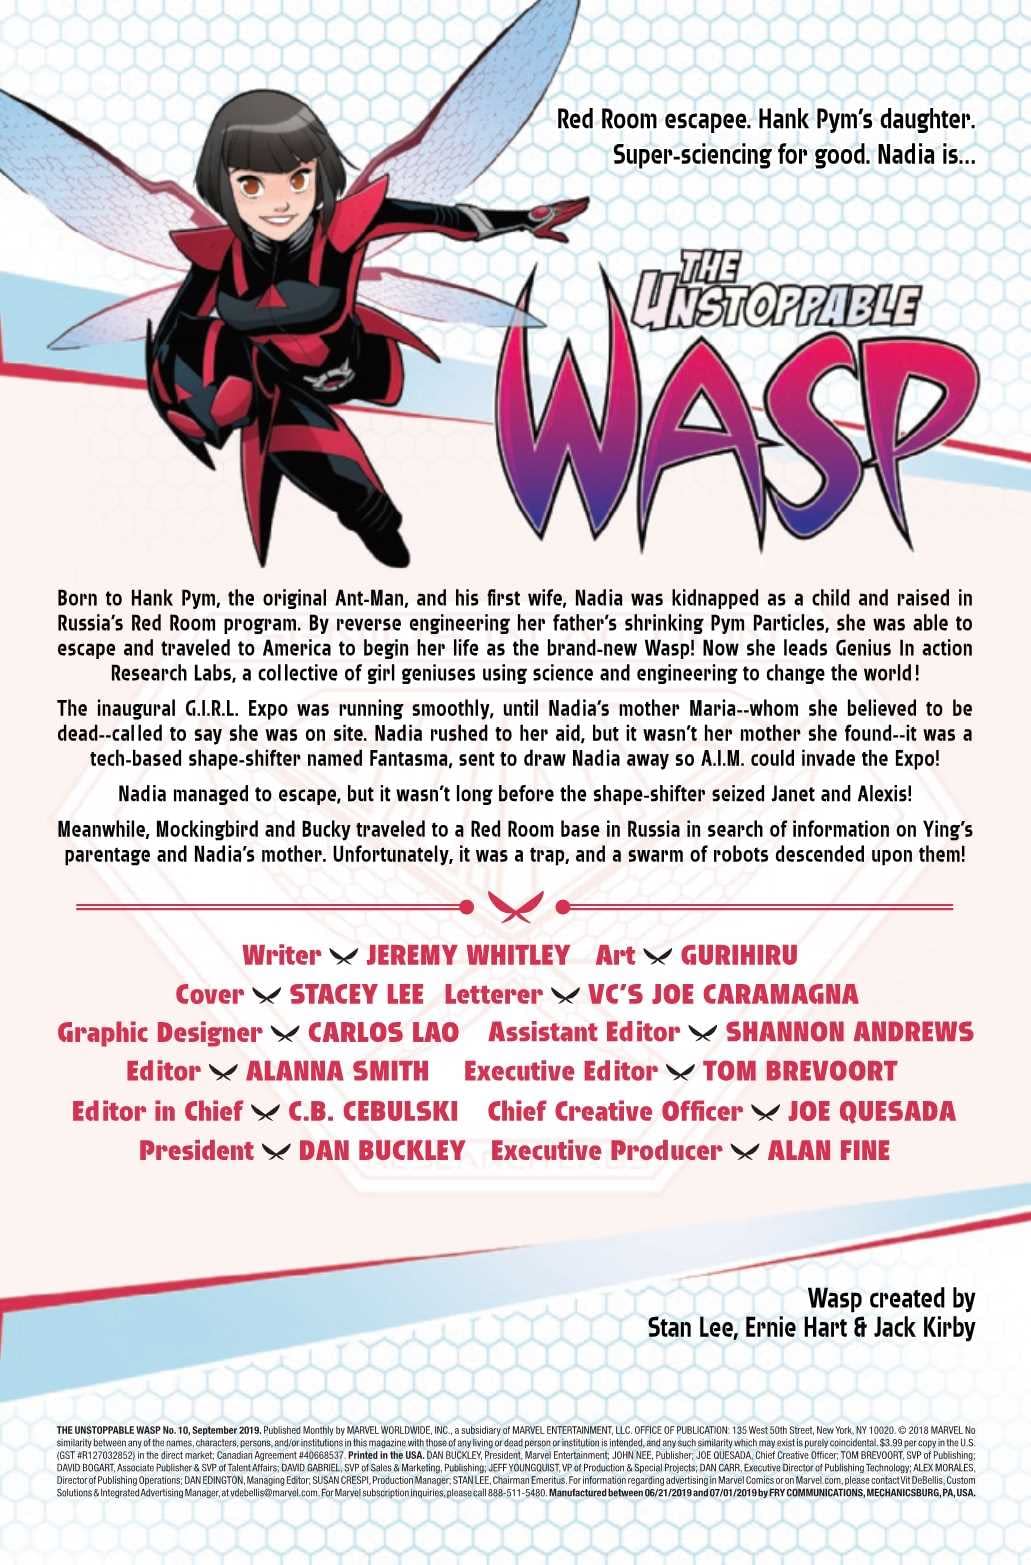 Unstoppable Wasp #10: The Danger of Jailbreaking Your iPhone [Preview]